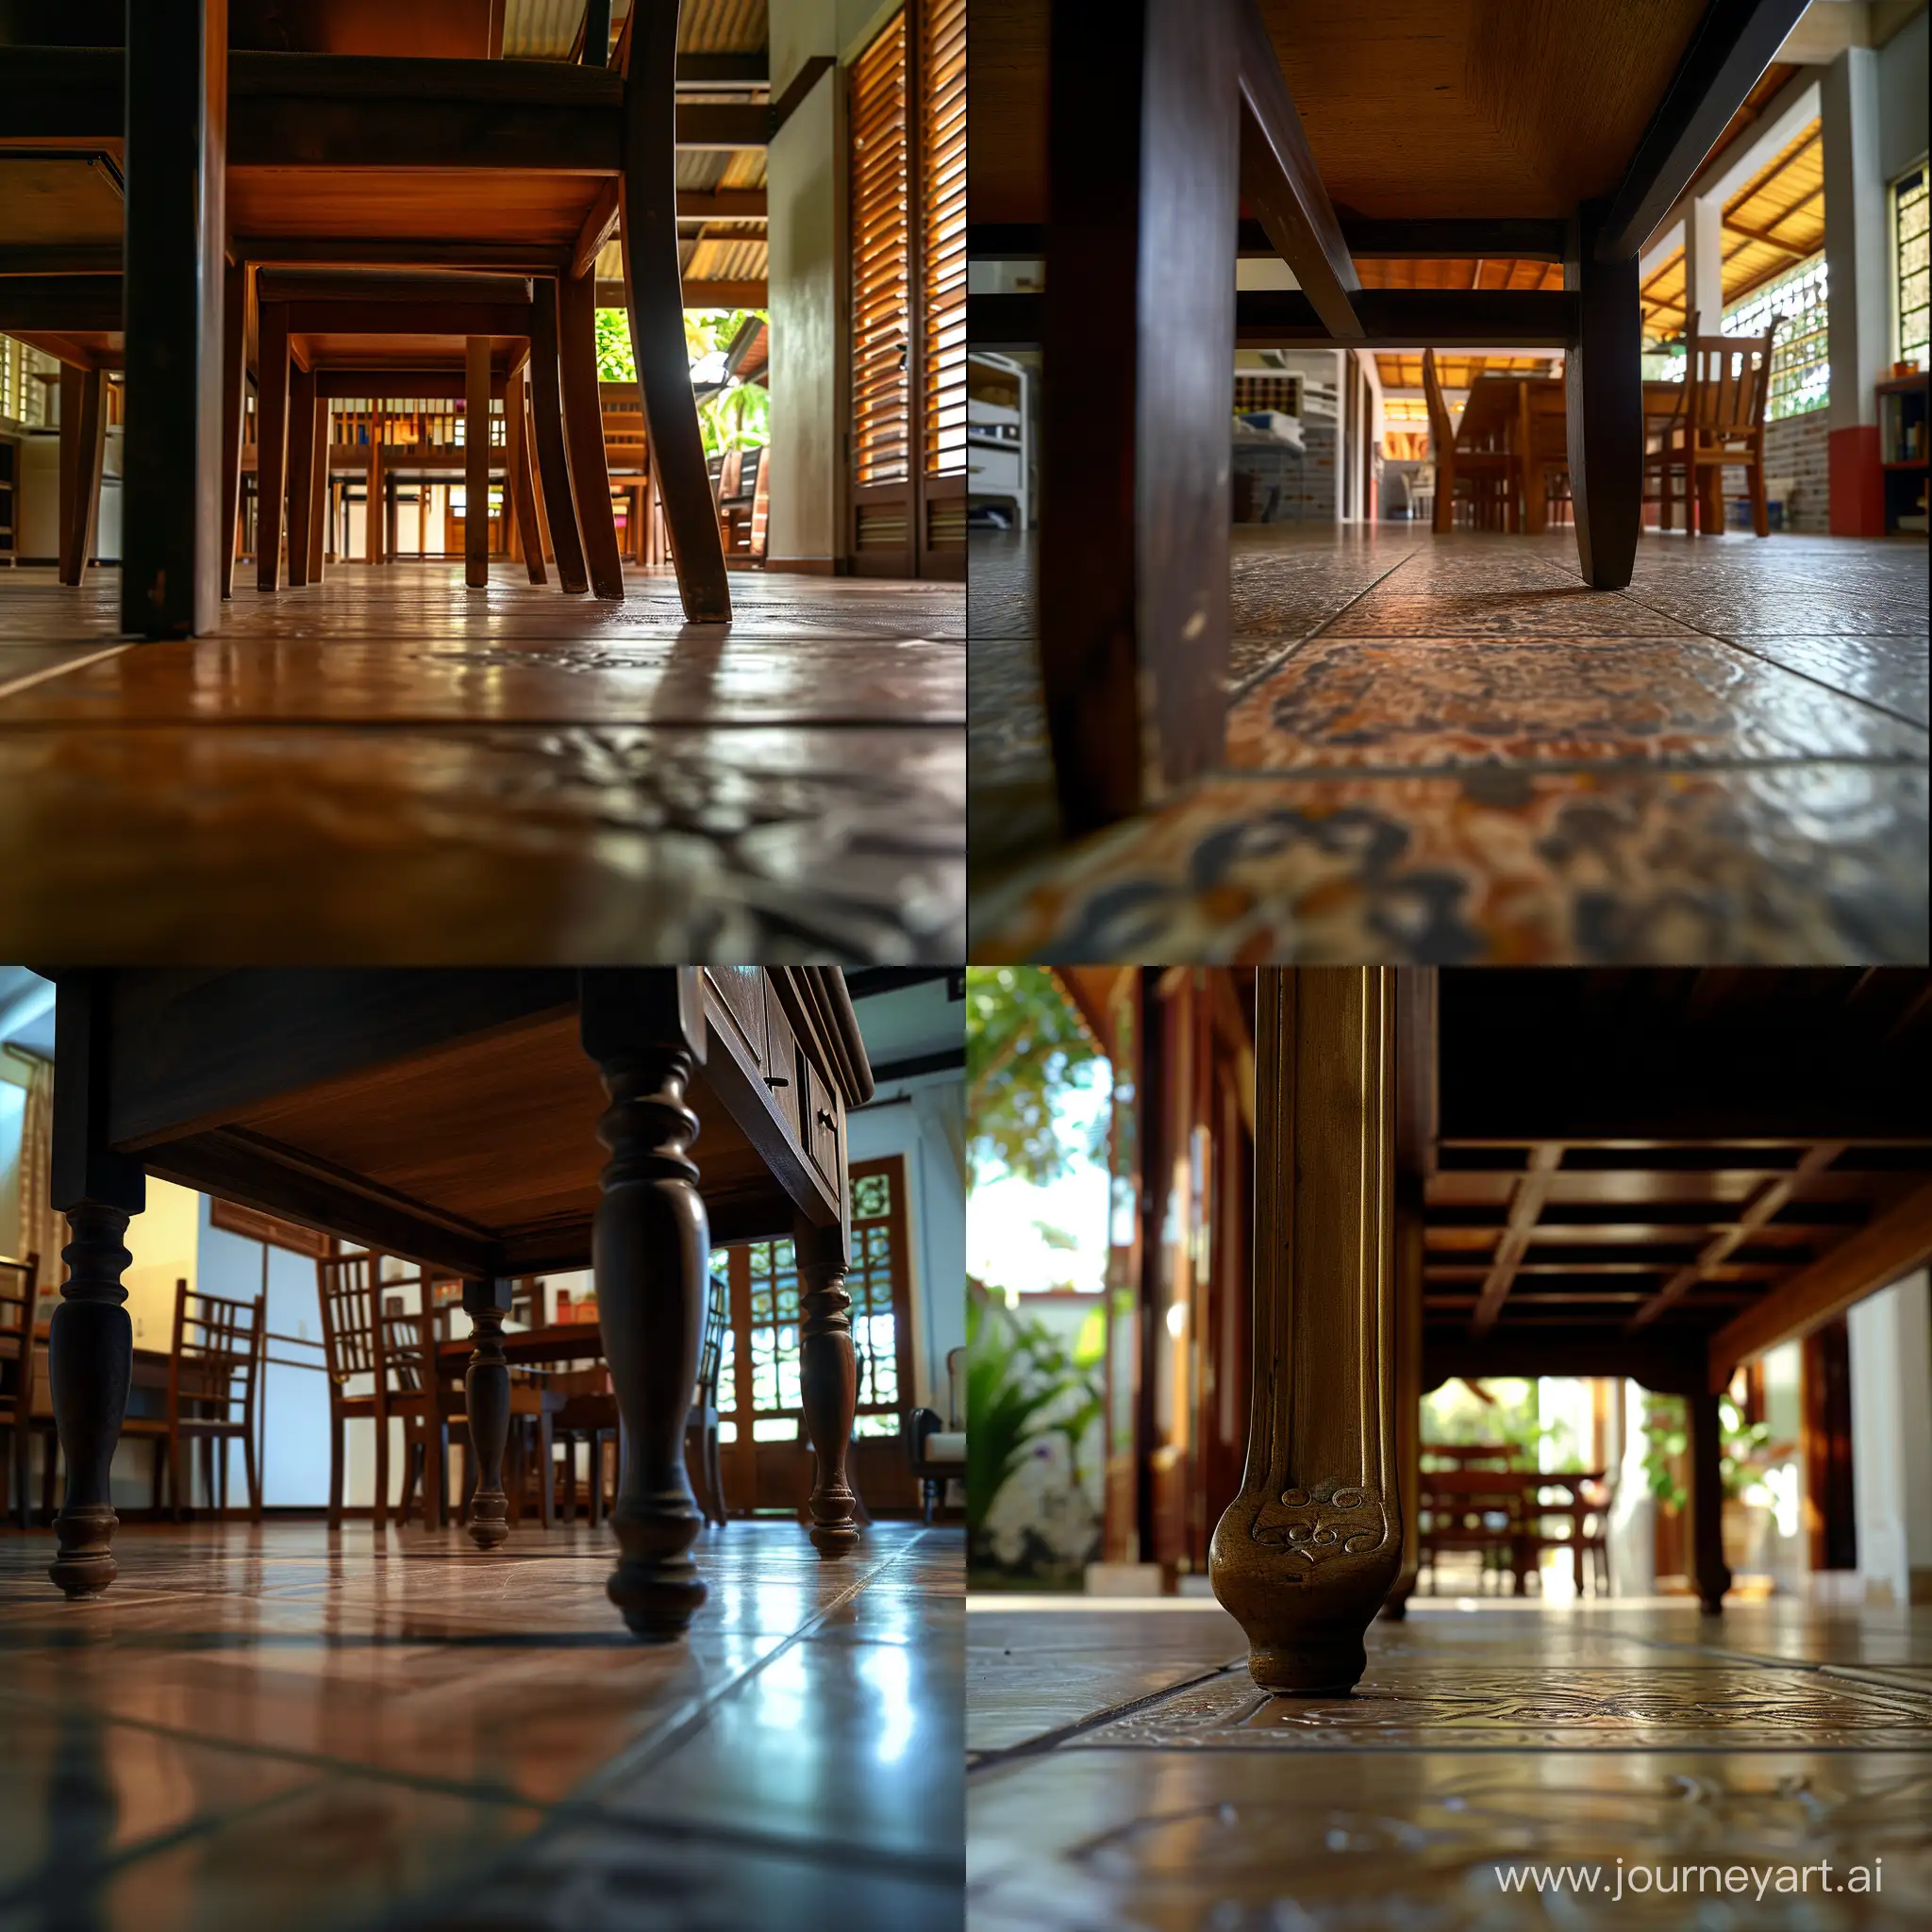 Modern-Malay-House-Interior-Ultra-Realistic-CloseUp-View-from-Under-the-Table